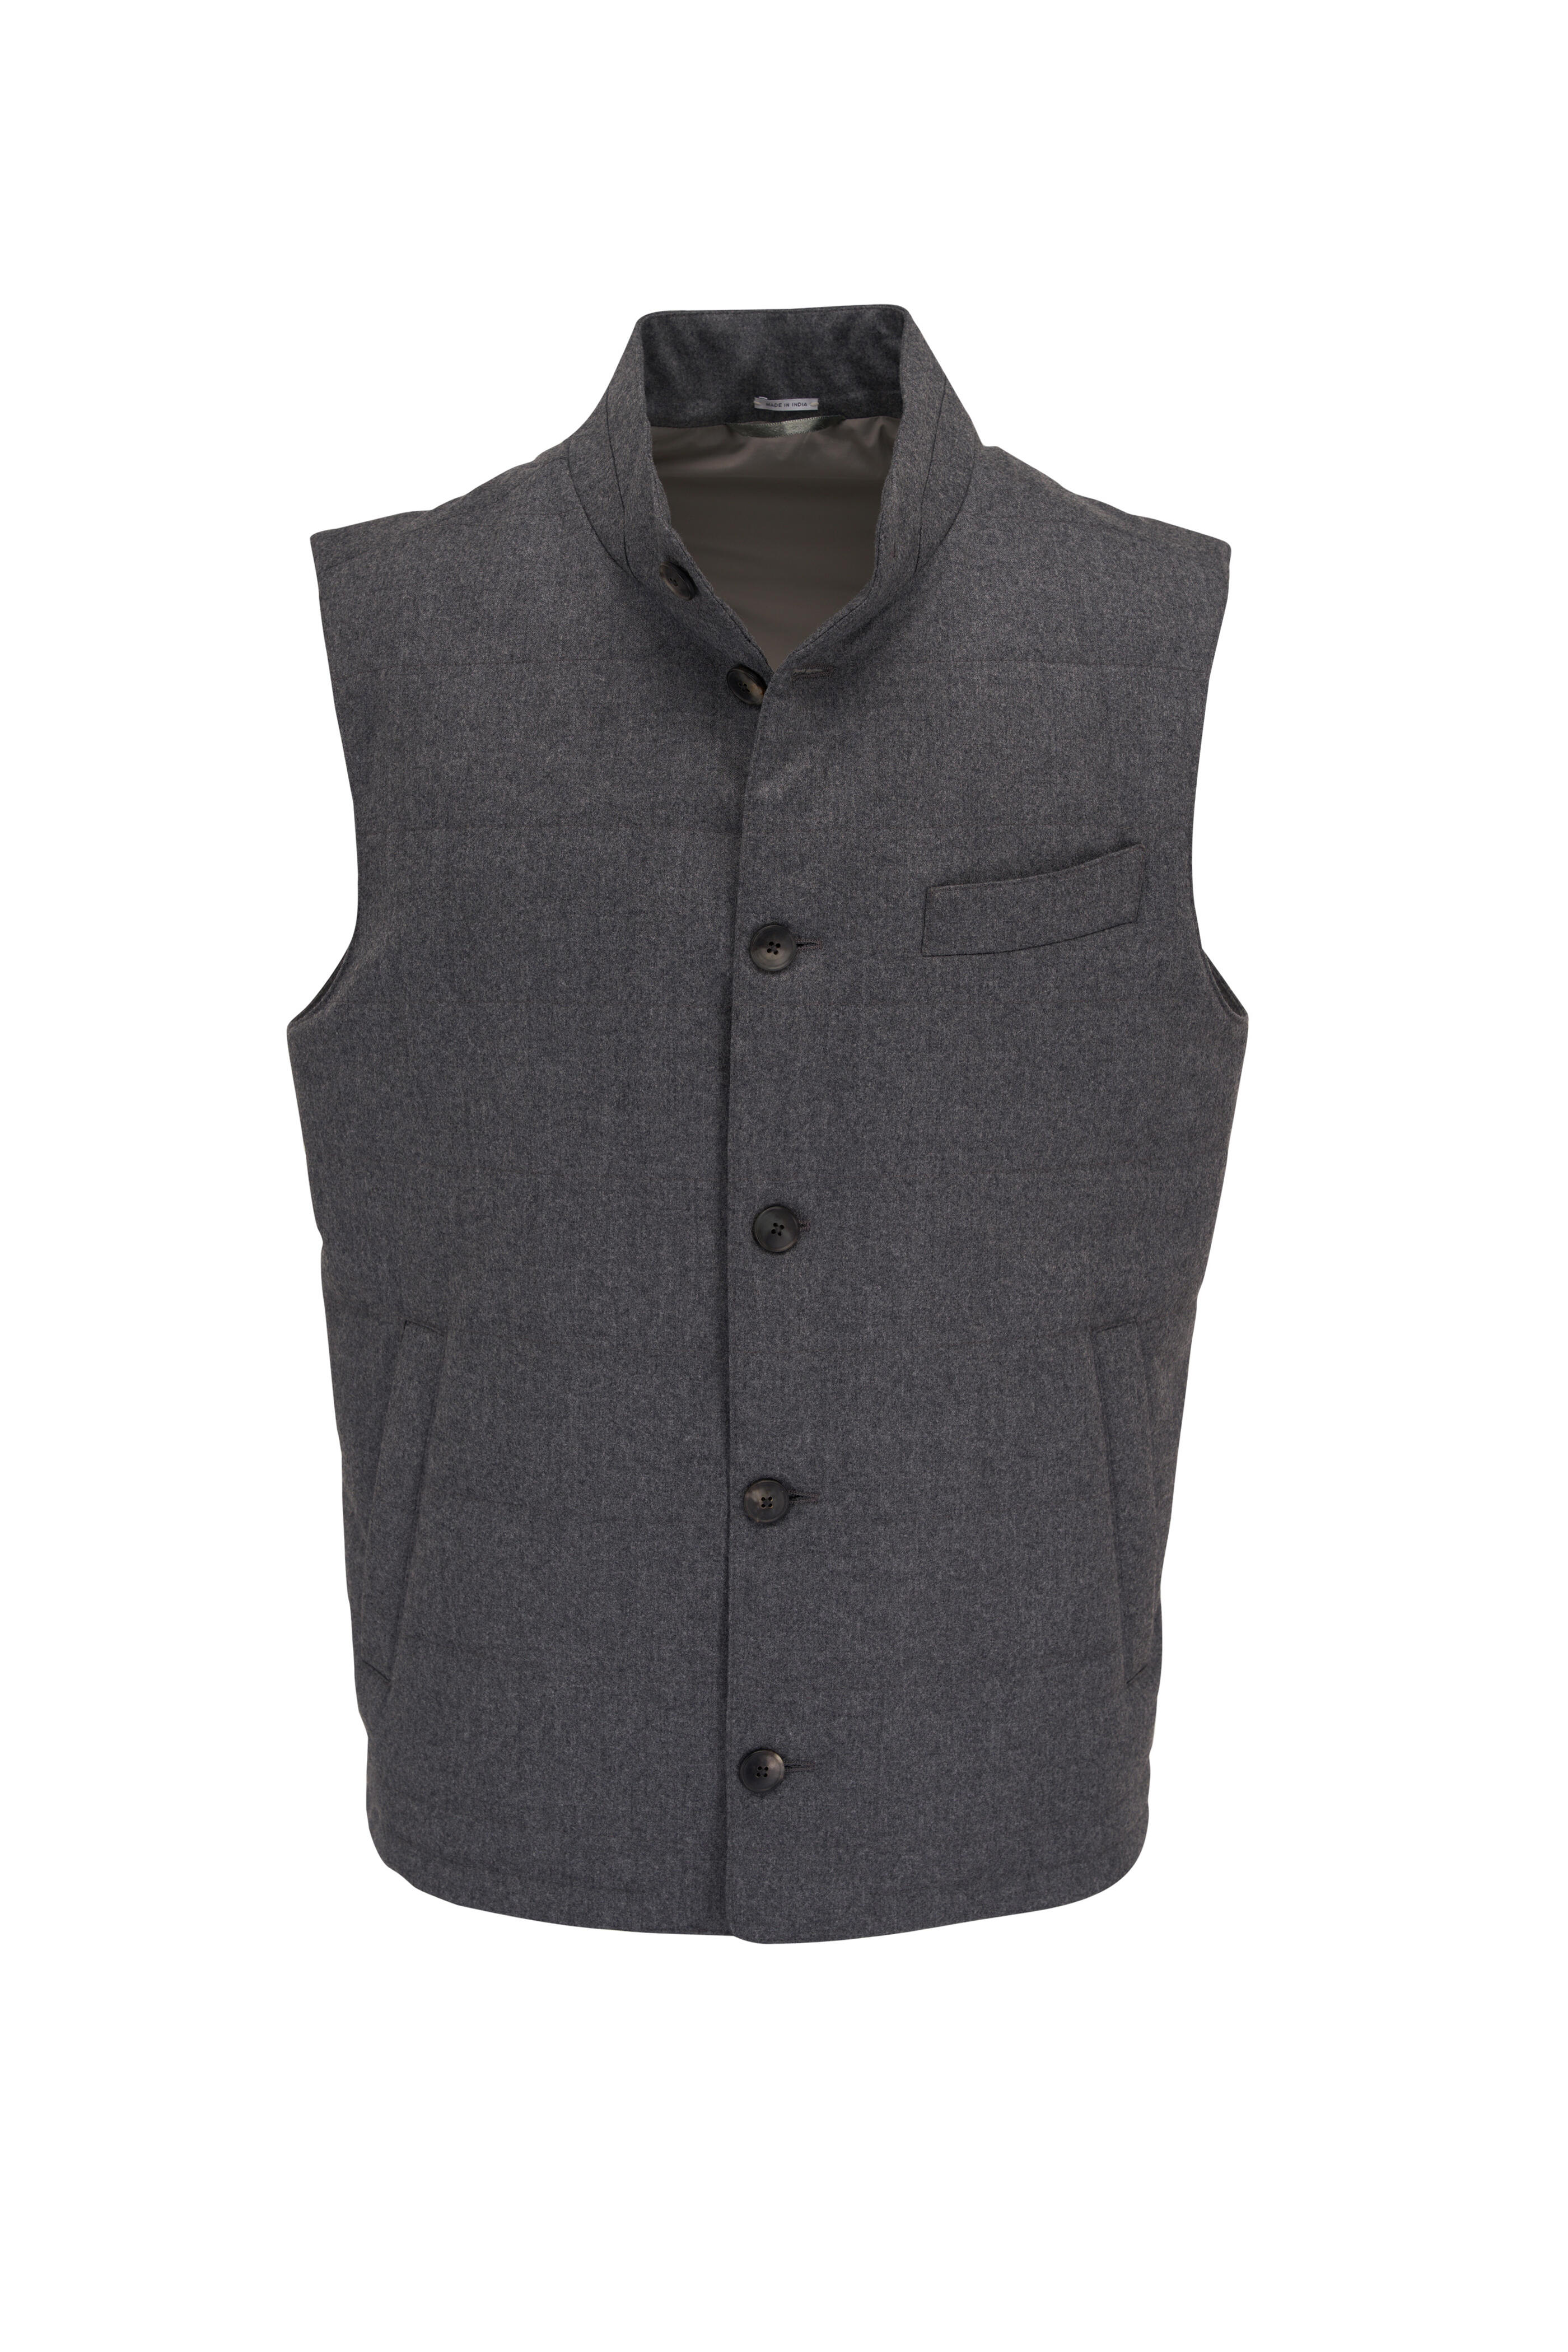 Atelier Munro - Charcoal Gray Wool Front Button Vest